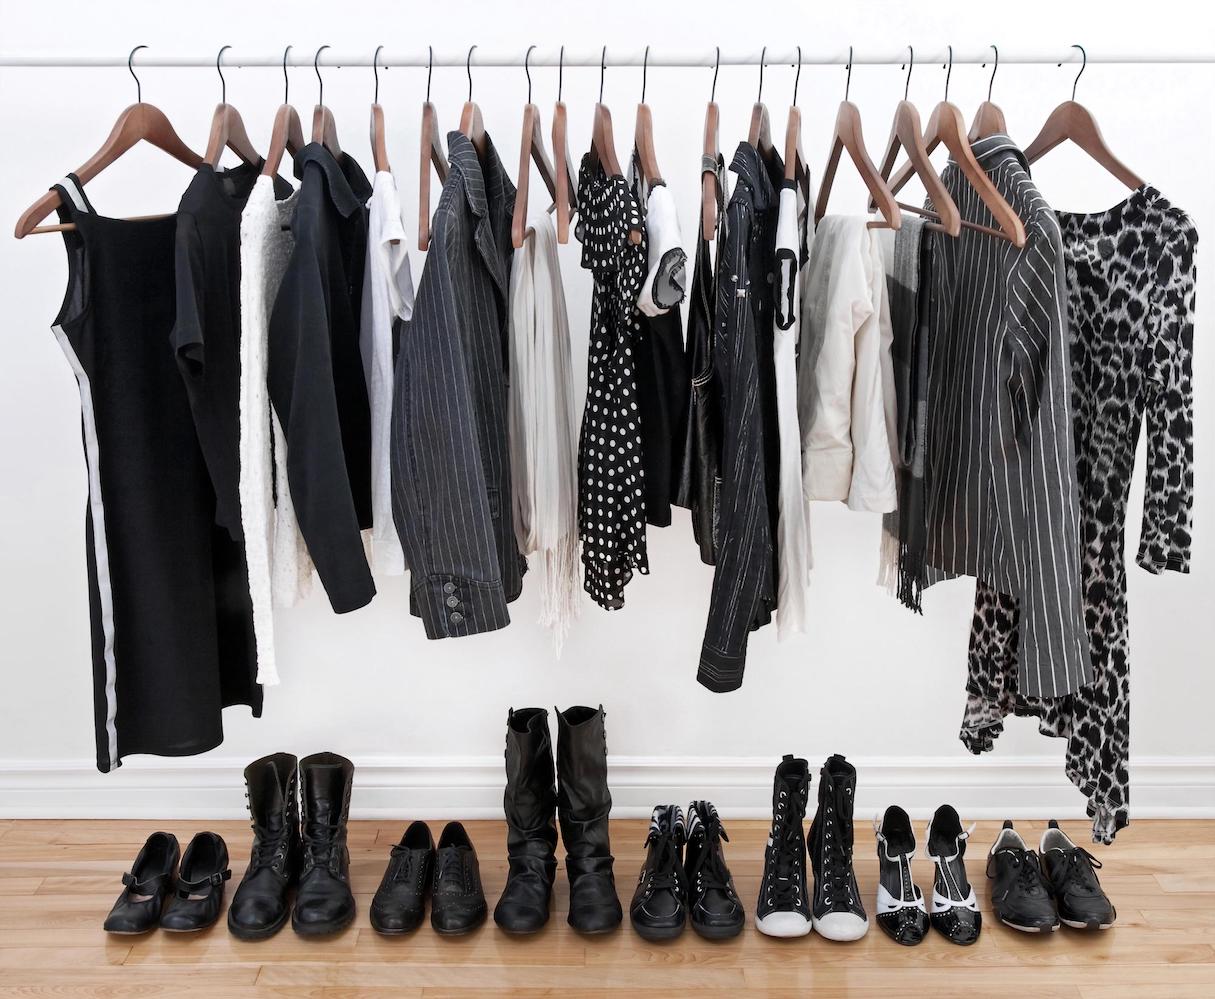 An assortment of black and white clothes hanging on a rack. Black and white shoes neatly lined up underneath the rack.